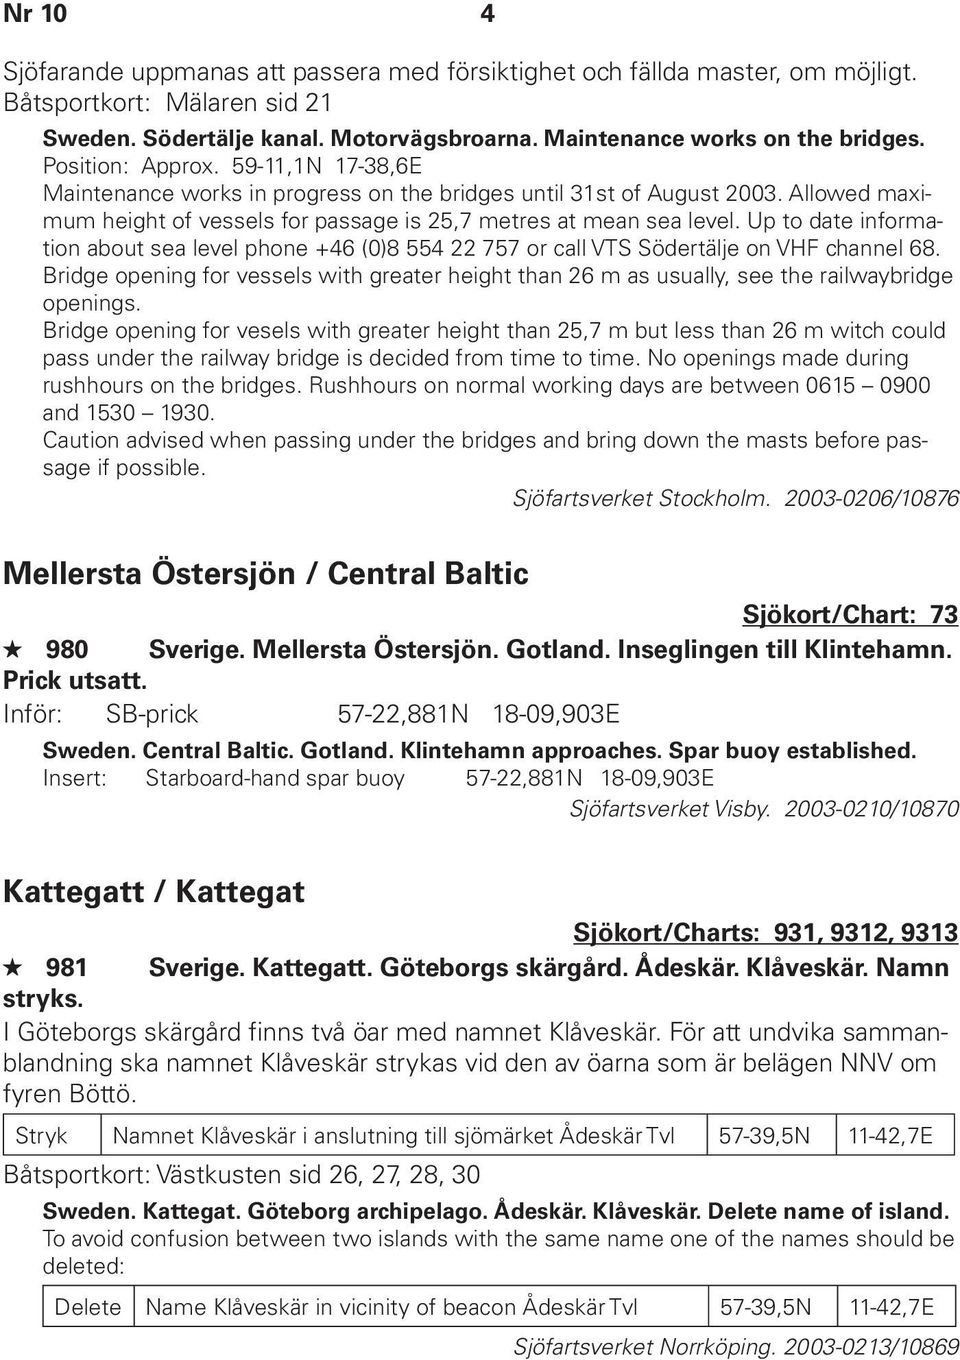 Up to date information about sea level phone +46 (0)8 554 22 757 or call VTS Södertälje on VHF channel 68.